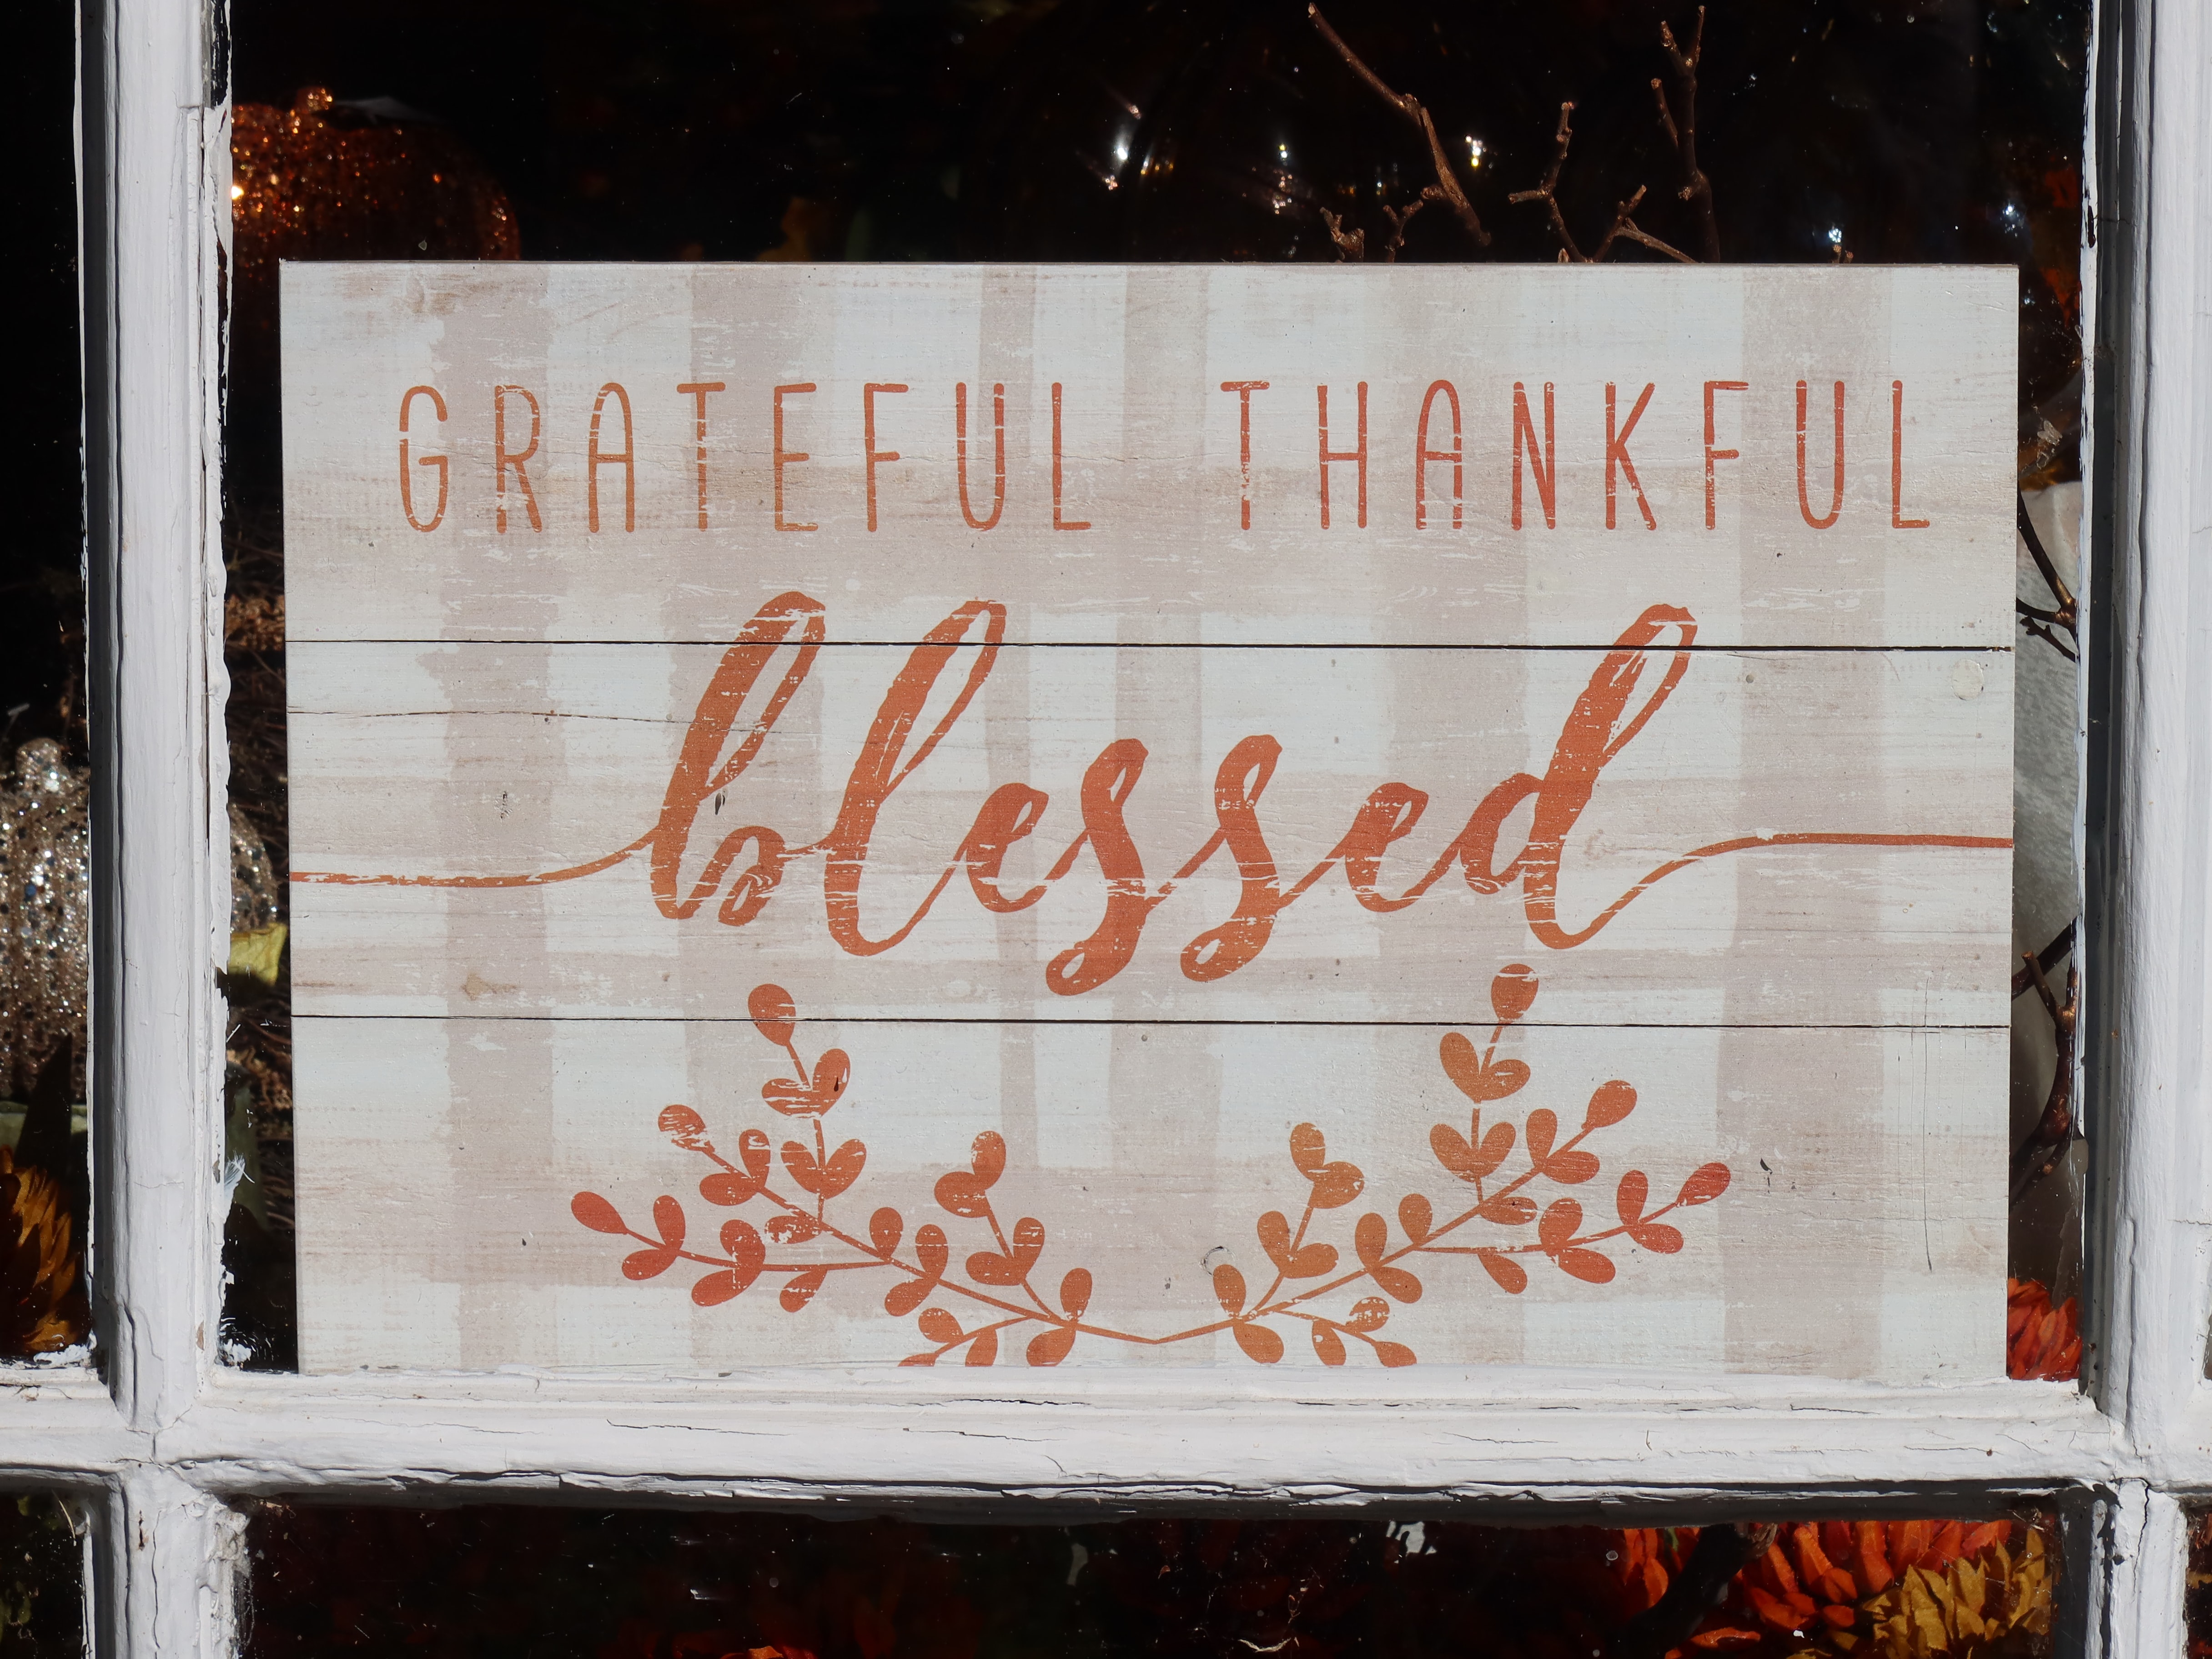 placard reading grateful thankful blessed